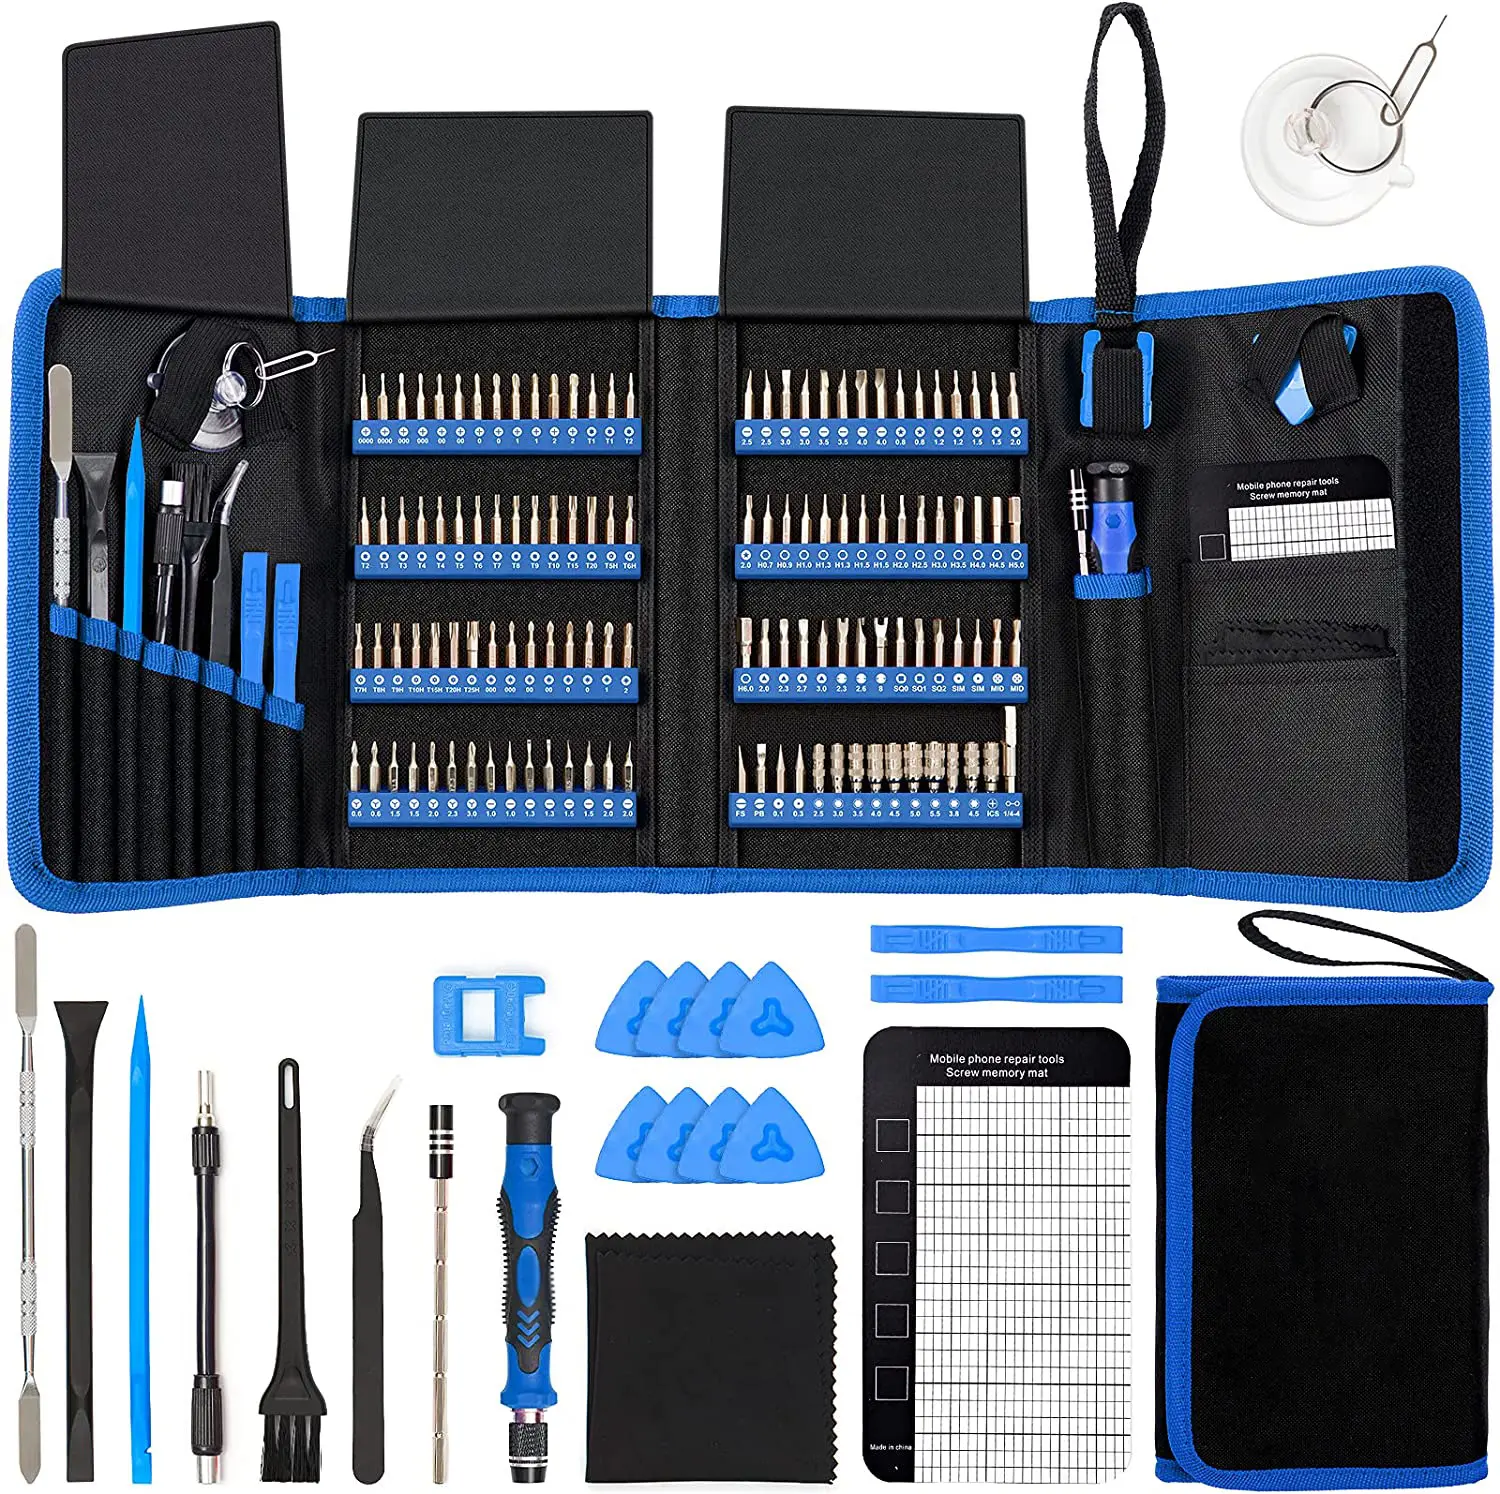 Screwdriver Sets 142-Piece Electronics Precision Screwdriver with 120 Bits Magnetic Repair Tool Kit for iPhone